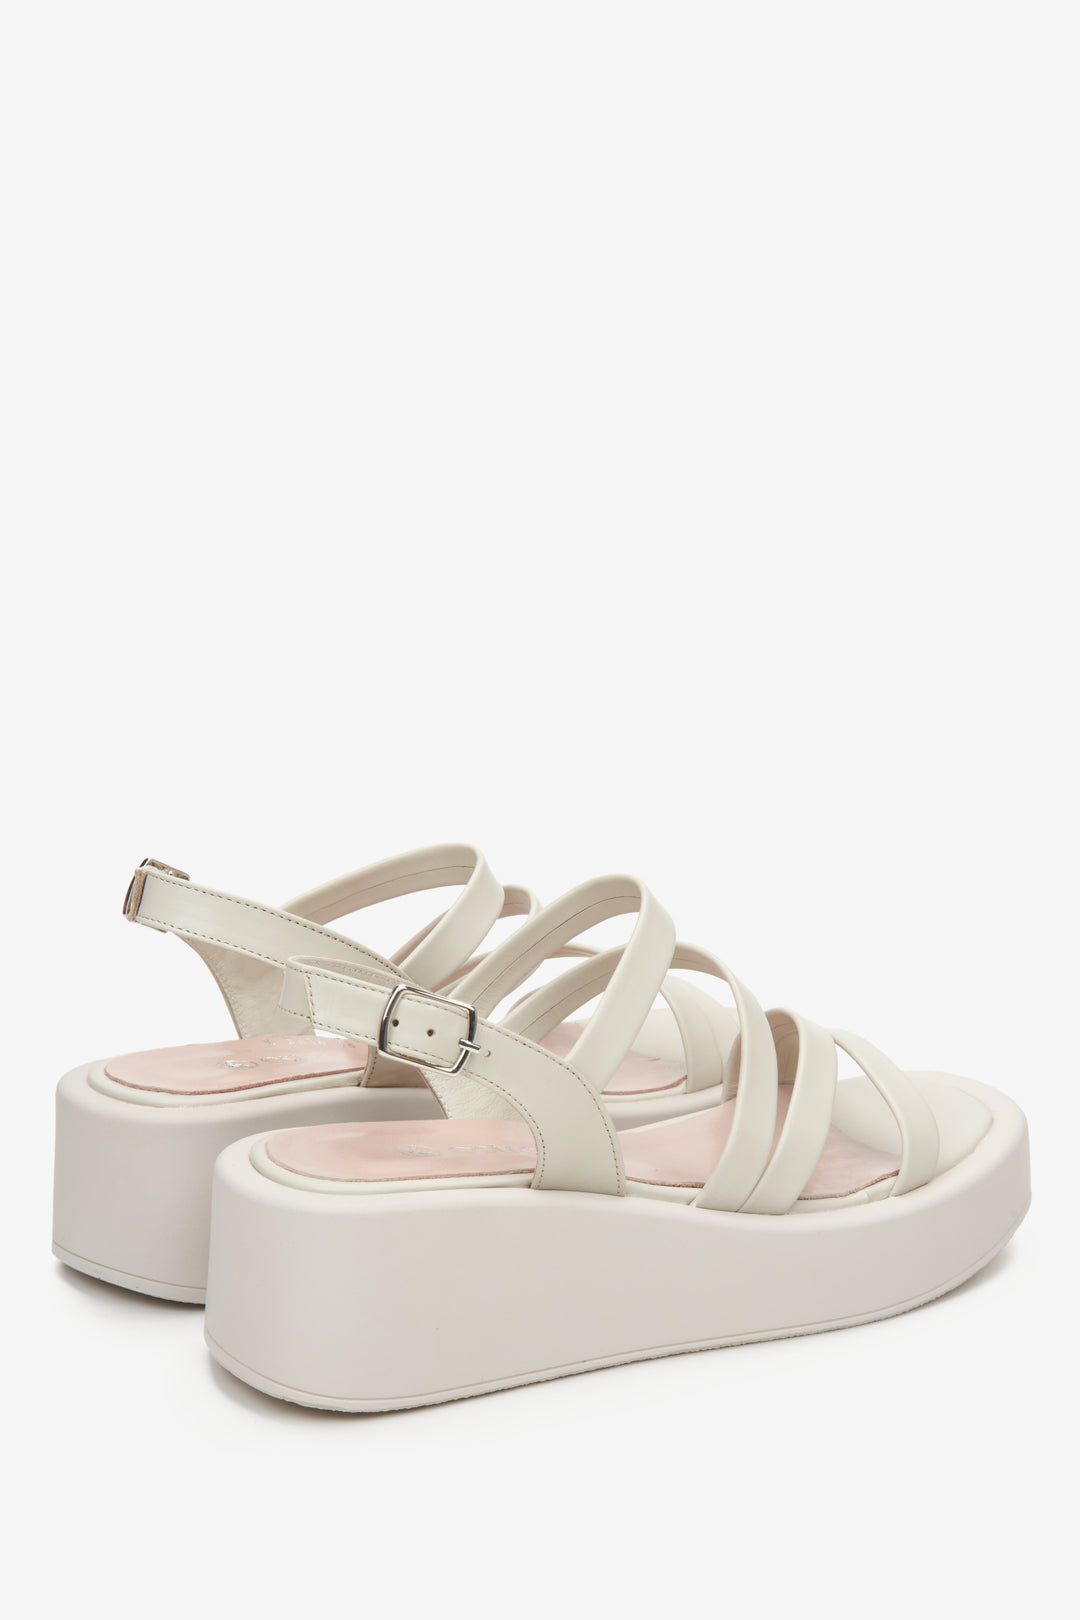 Women's leather light beige wedge sandals by Estro - close-up on the side line and heel of the shoe.